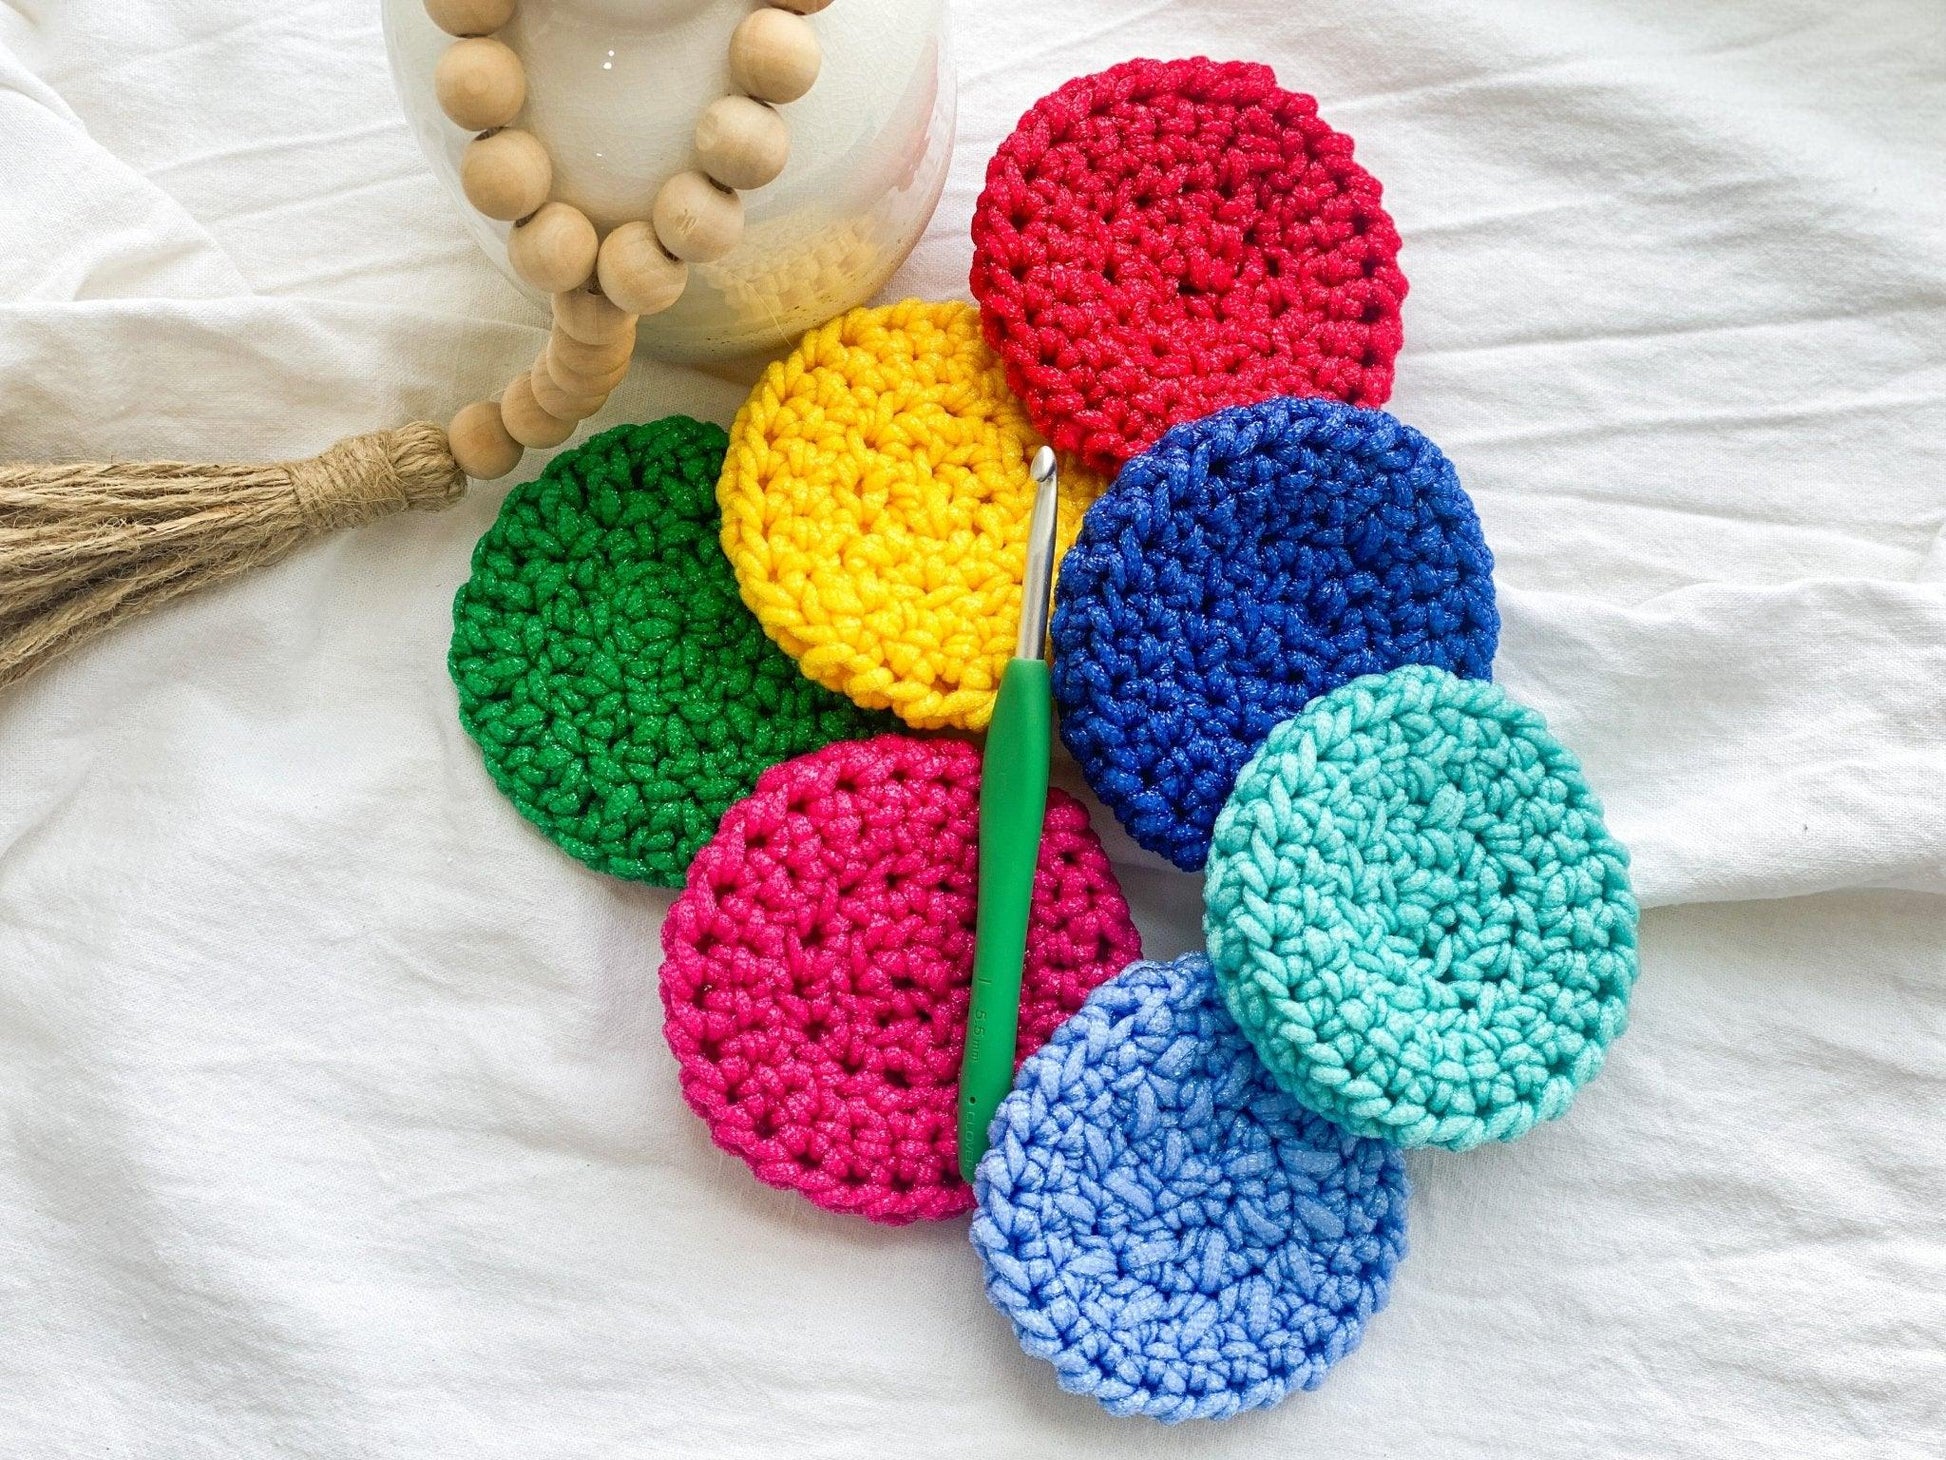 Several Bright Handmade Crochet Dish Scrubbies laying on White Linen Cloth with Green Handled Crochet Hook